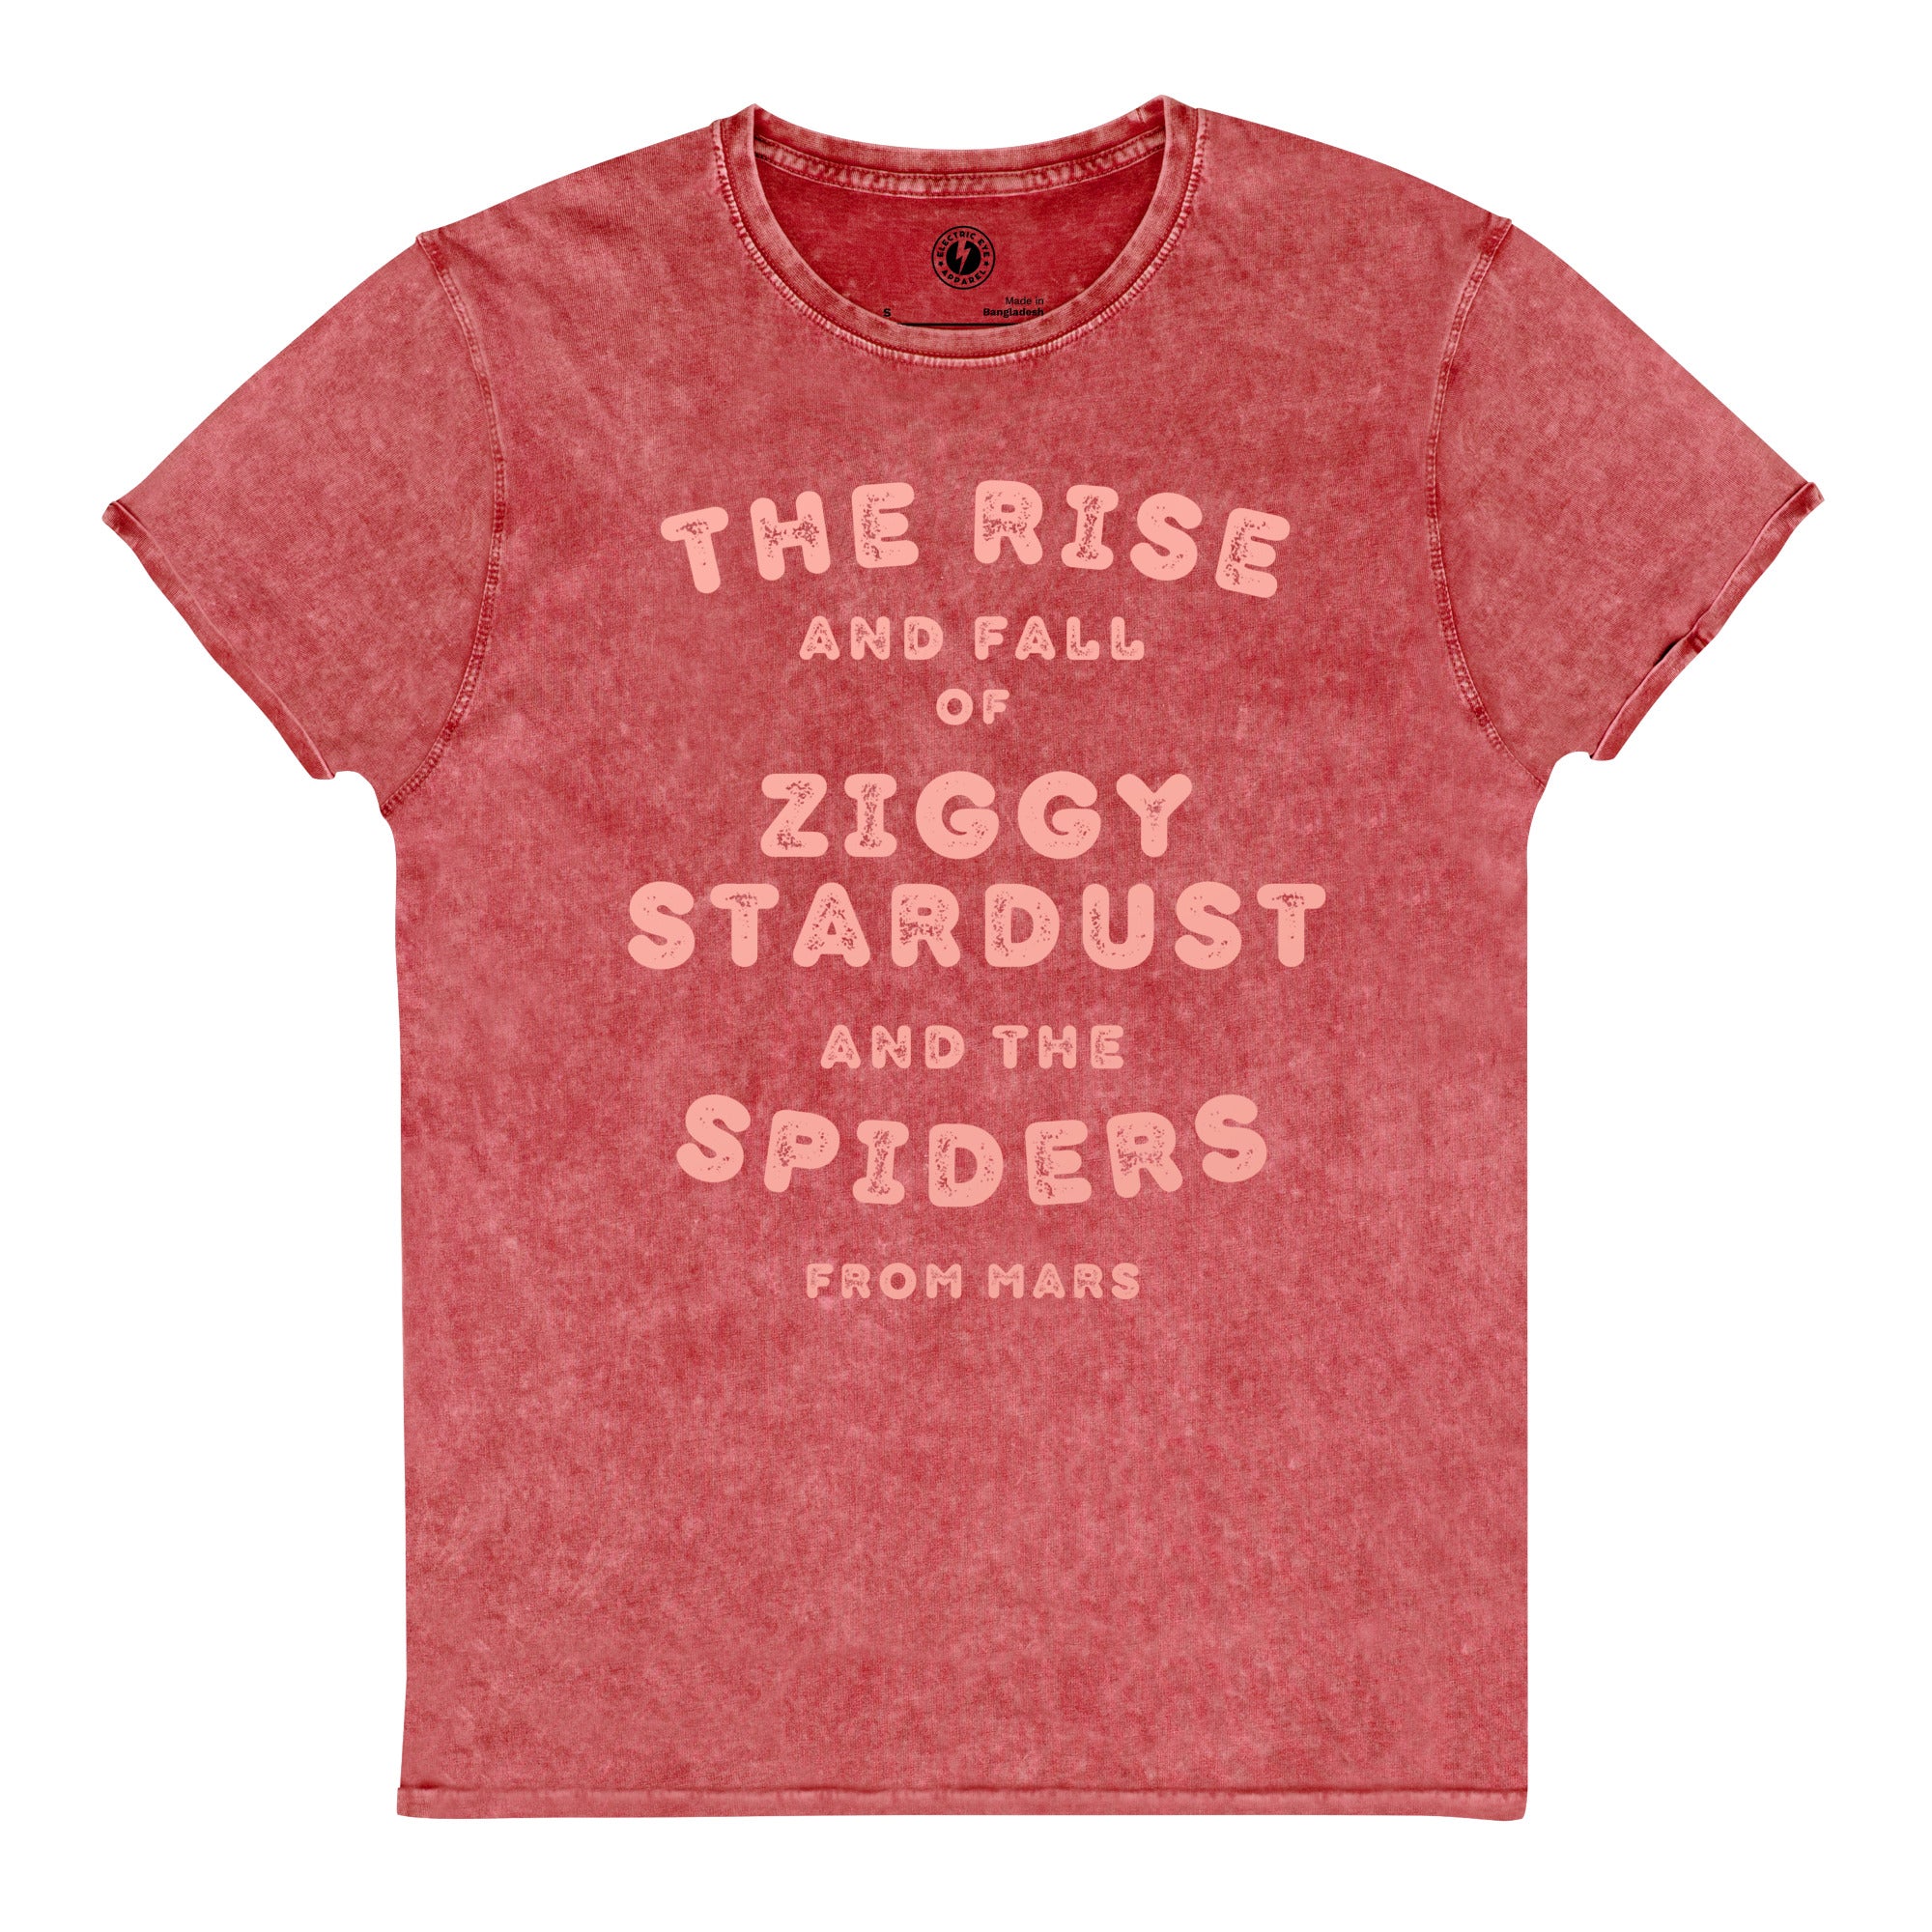 The Rise And Fall Of Ziggy Stardust Printed Vintage Style Aged Soft Combed Cotton Unisex T-Shirt - Salmon Pink Print